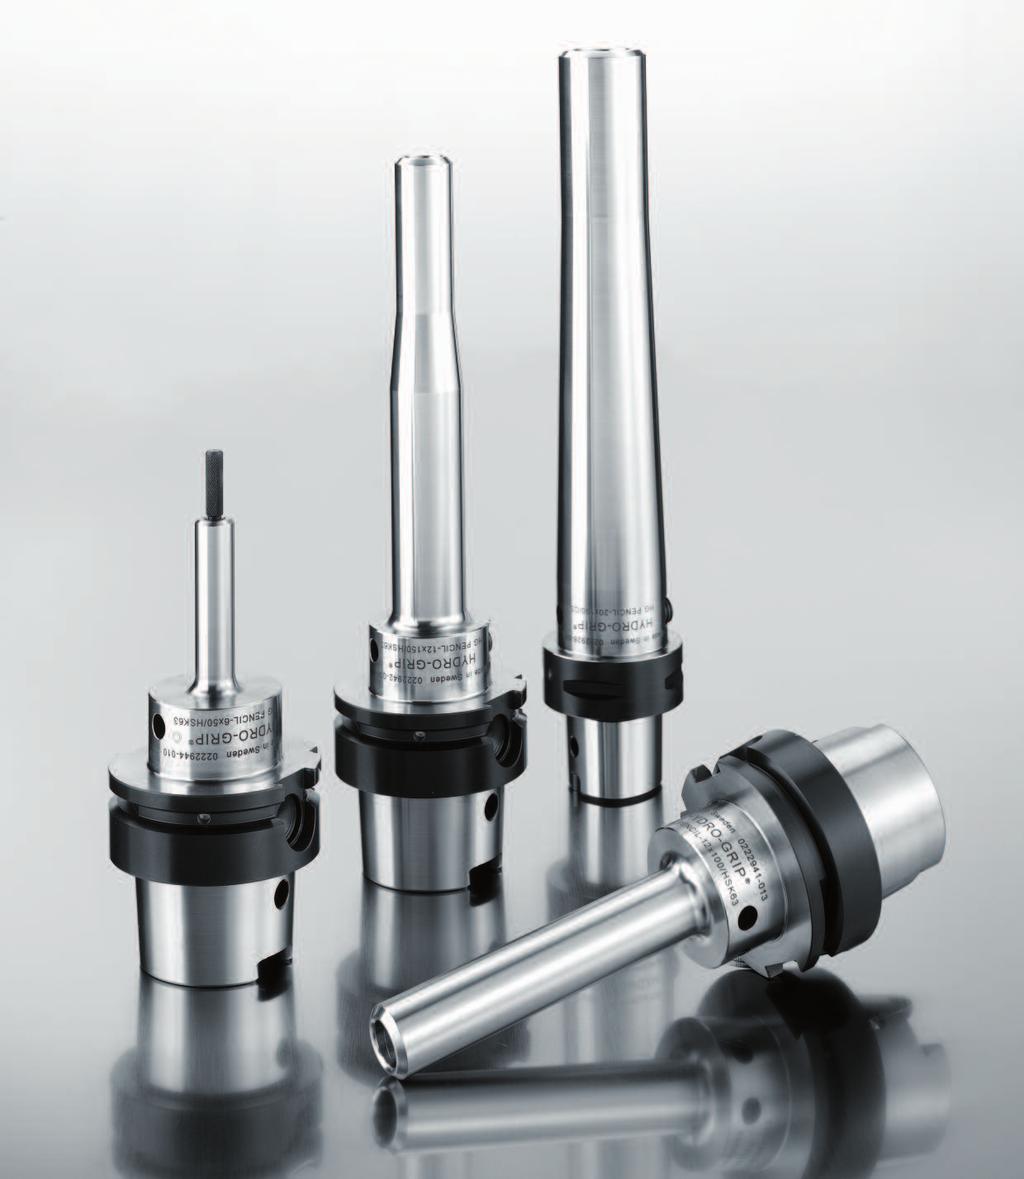 PENCIL DESIGN Benefits and features For drilling to finishing Pencil design enabling machining in deep cavities and complex